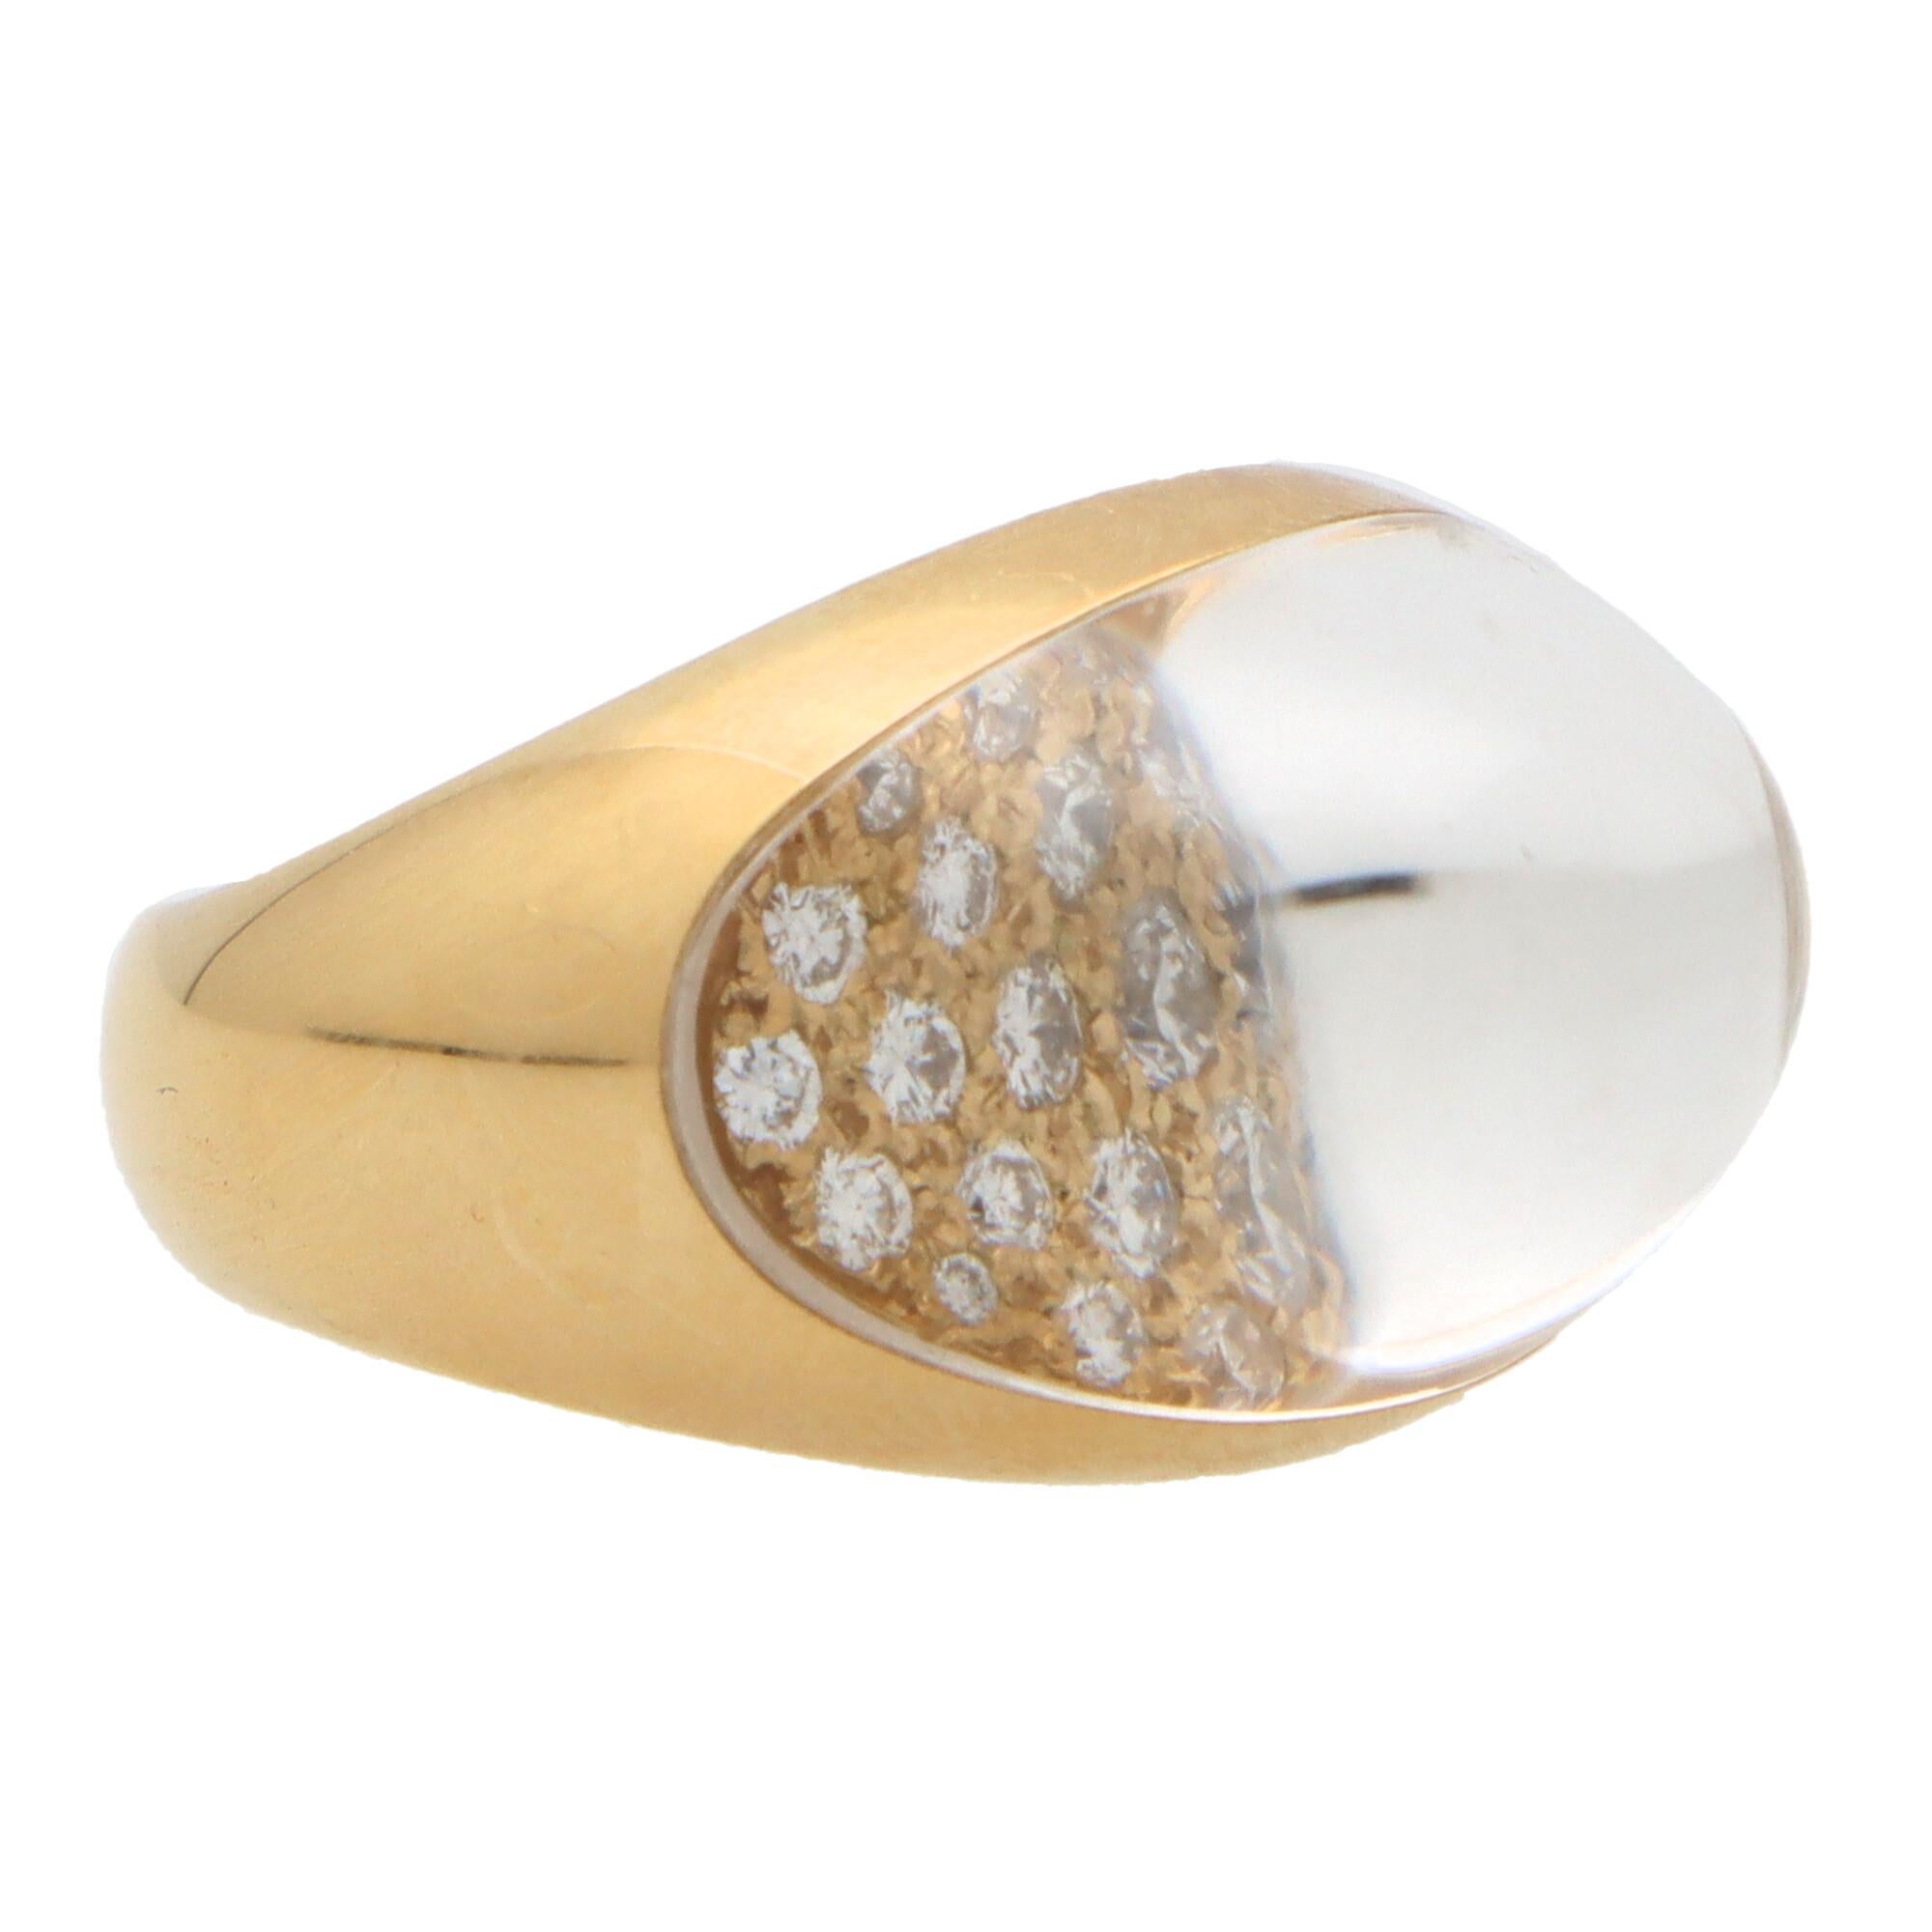 A beautiful vintage Cartier rock crystal and diamond dress ring from the Myst de Cartier collection set in 18k yellow gold.

The ring is set with an array of round brilliant cut diamonds with an overlay of clear rock on top. This is the encased in a